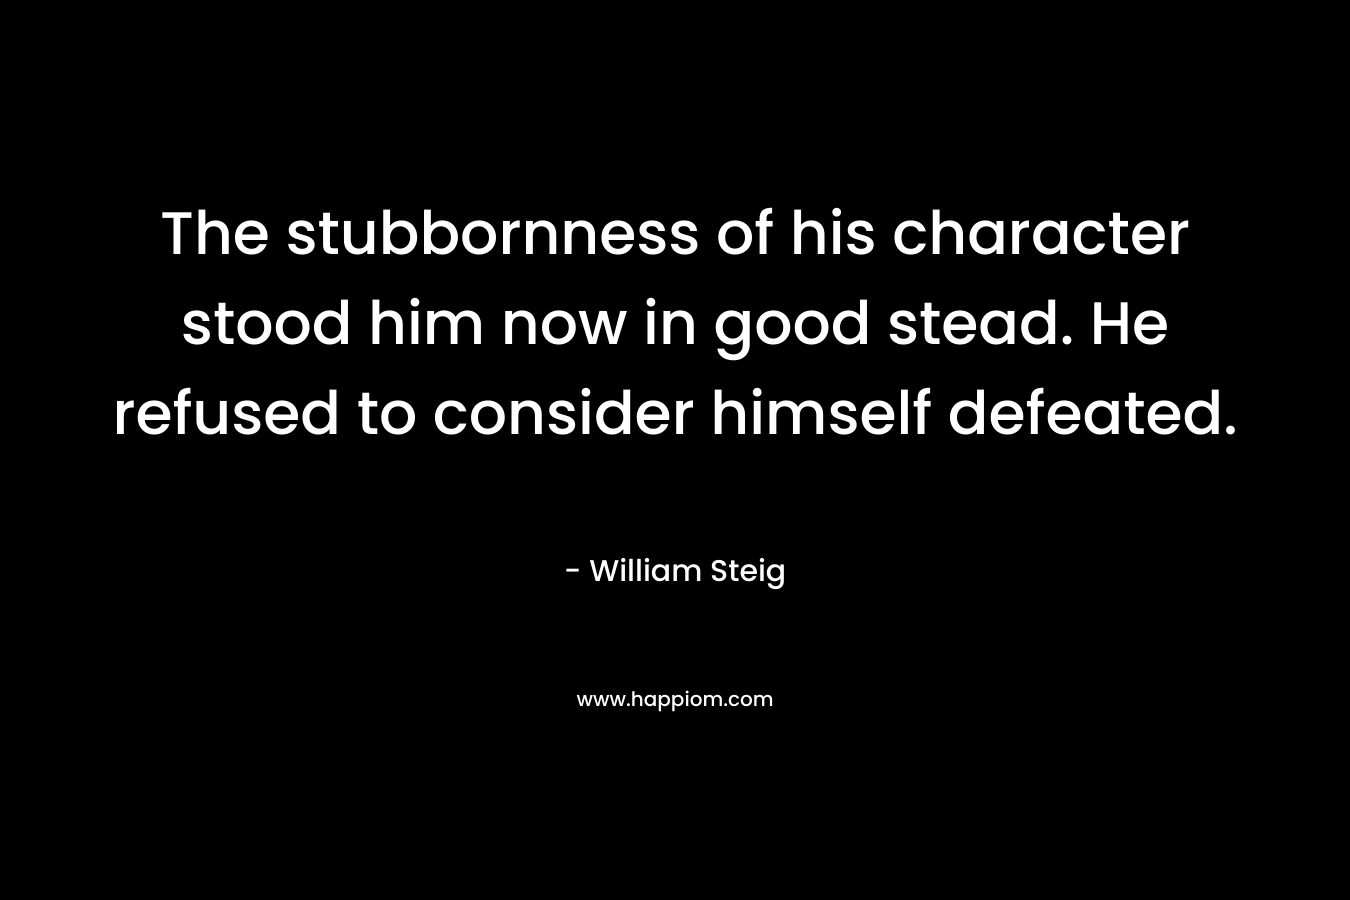 The stubbornness of his character stood him now in good stead. He refused to consider himself defeated. – William Steig